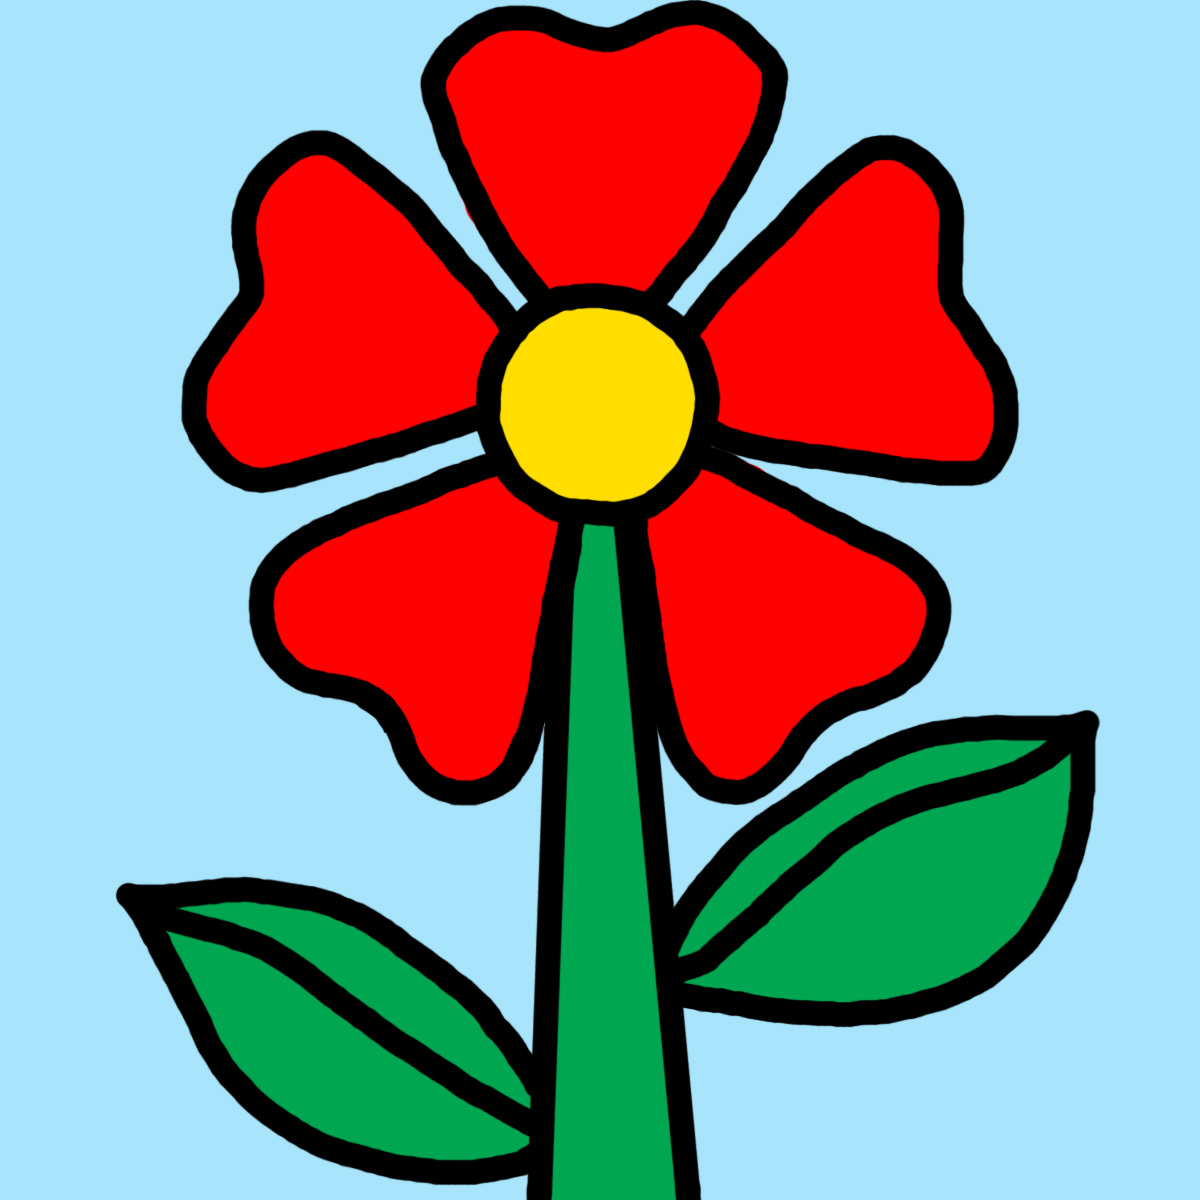 Free Flower Images Clipart, Download Free Clip Art, Free